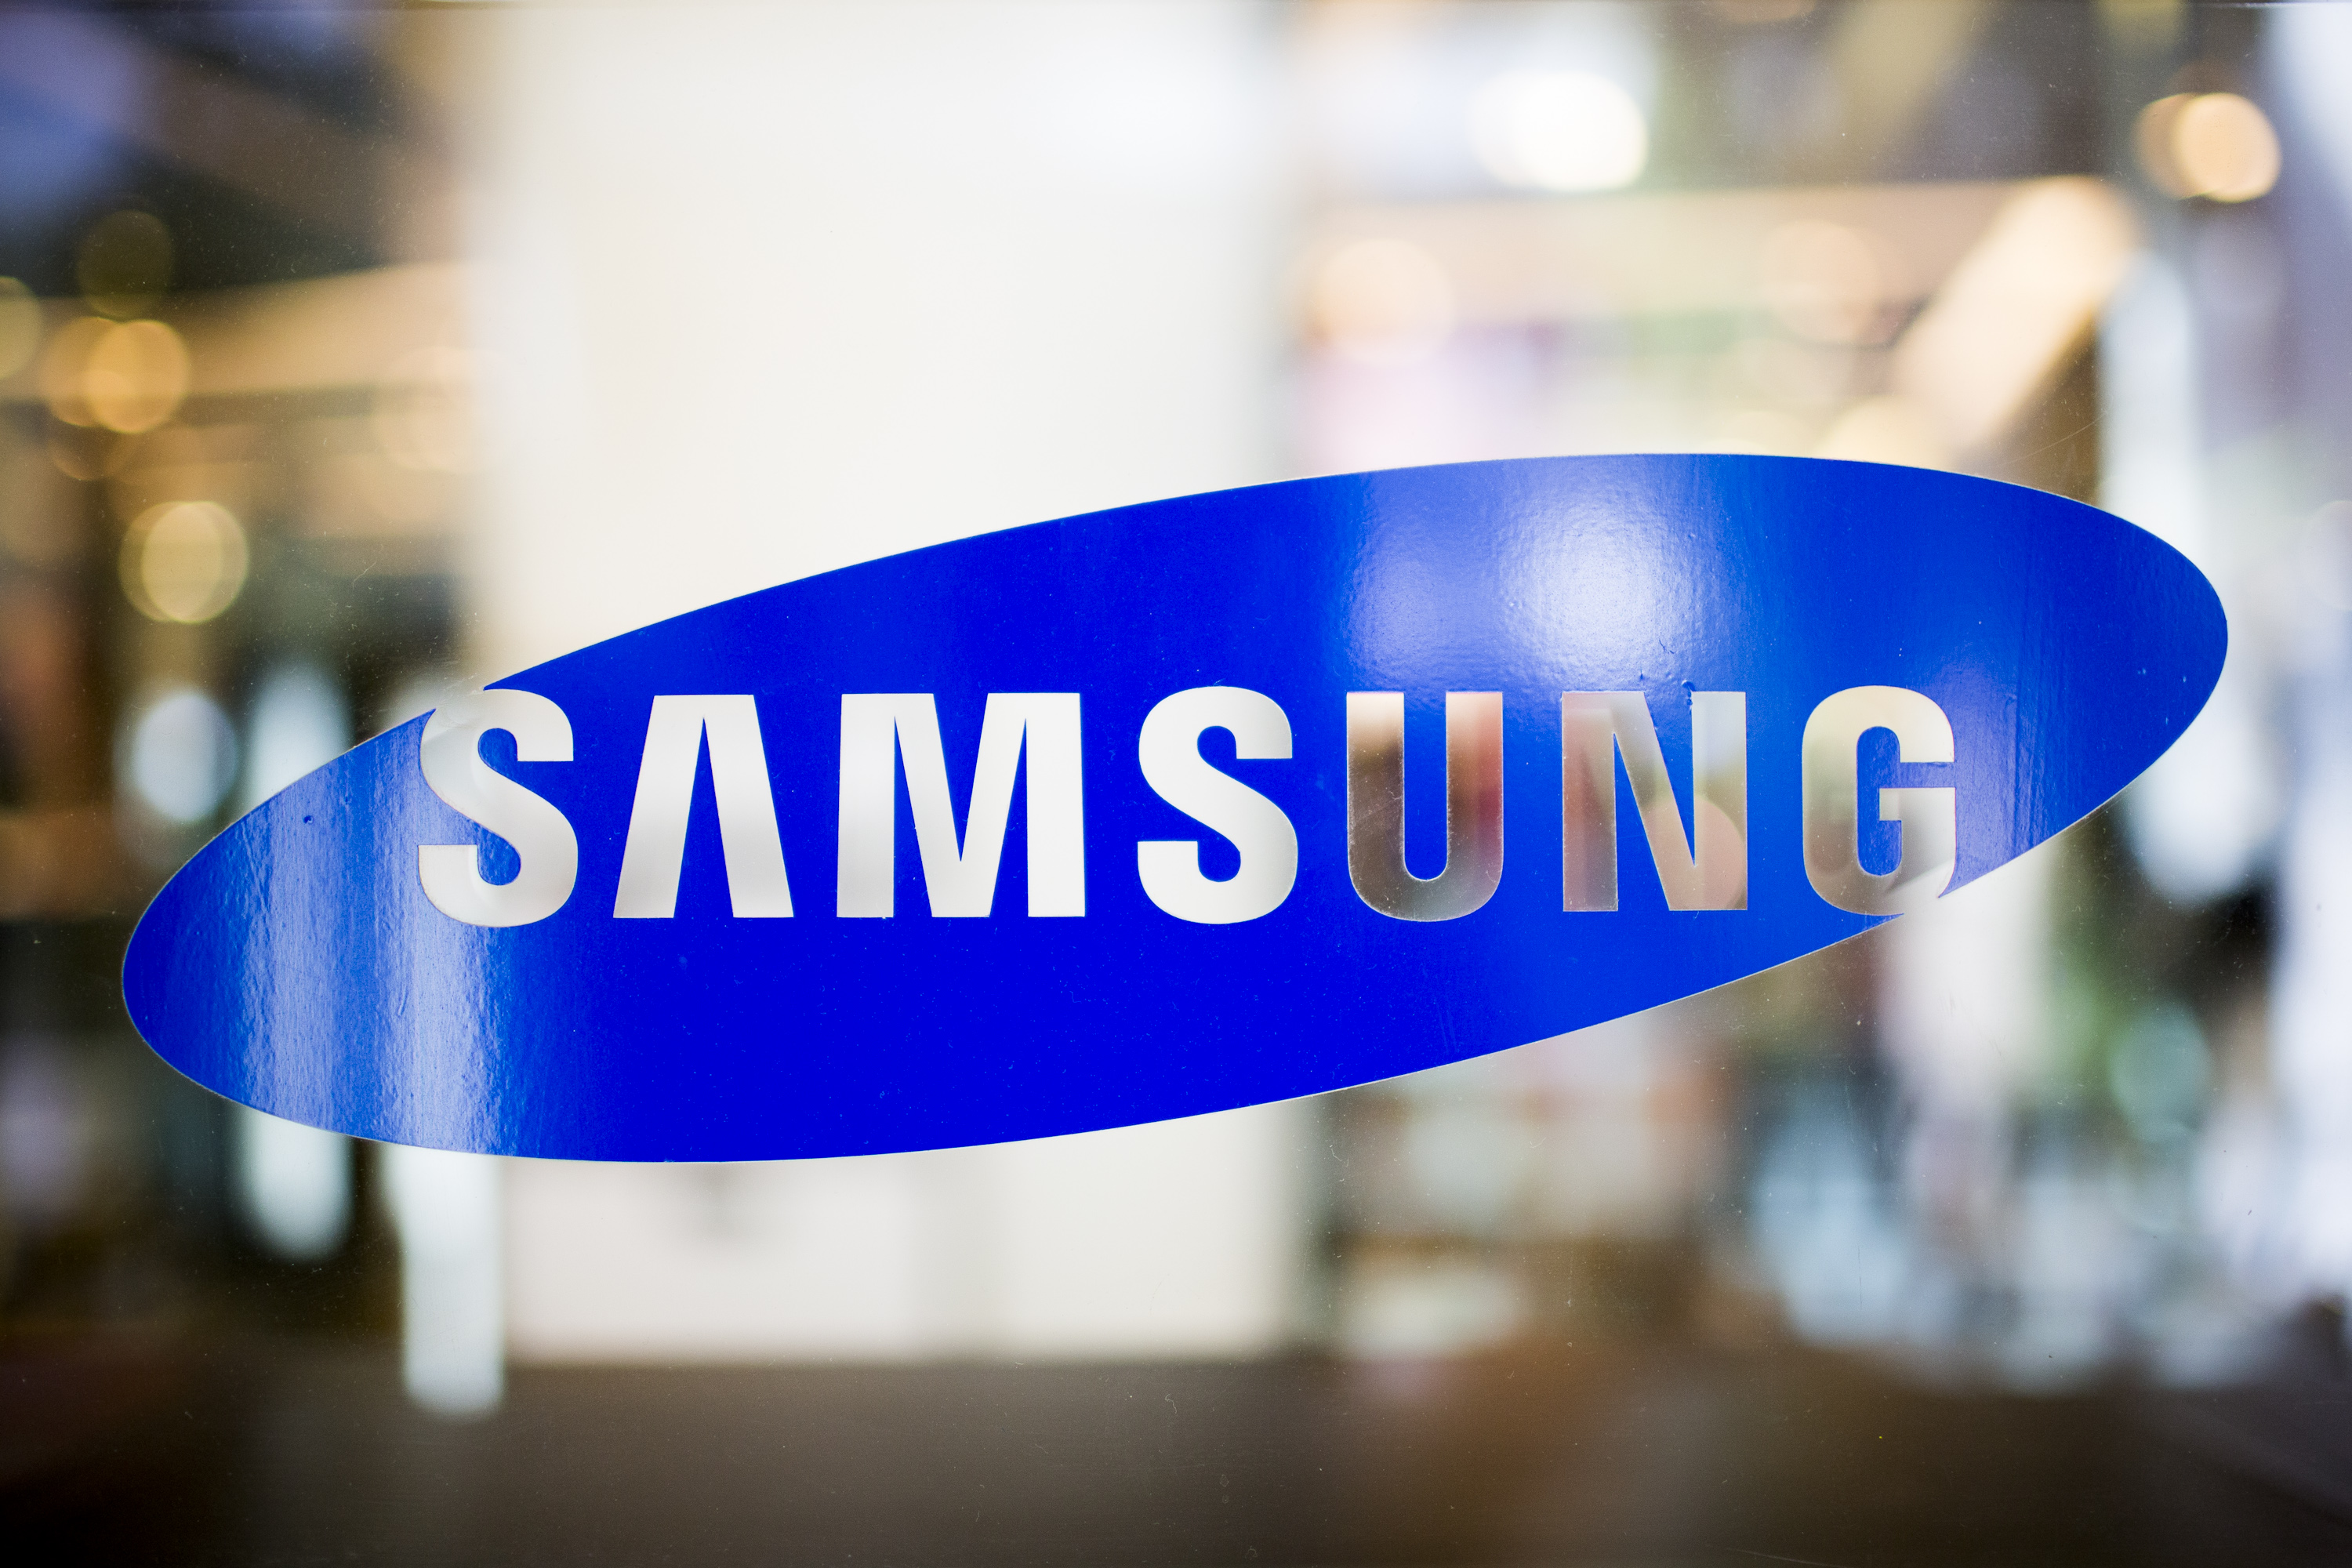 The Samsung Electronics Co. logo is displayed at a store in Bangkok, Thailand, on Thursday, Oct. 4, 2012. (Brent Lewin—Bloomberg/Getty Images)